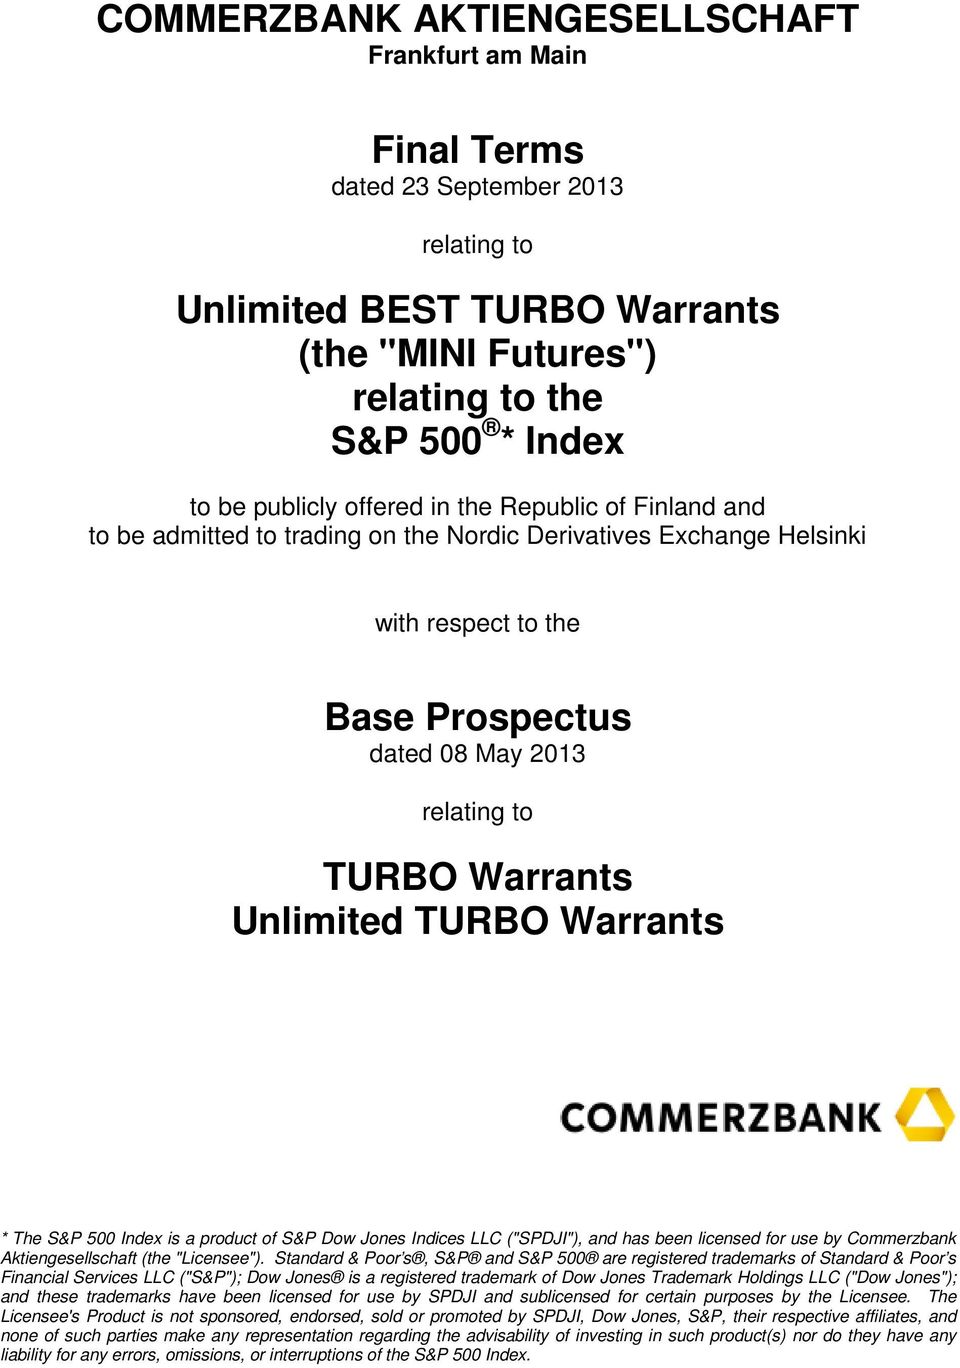 TURBO Warrants * The S&P 500 Index is a product of S&P Dow Jones Indices LLC ("SPDJI"), and has been licensed for use by Commerzbank Aktiengesellschaft (the "Licensee").